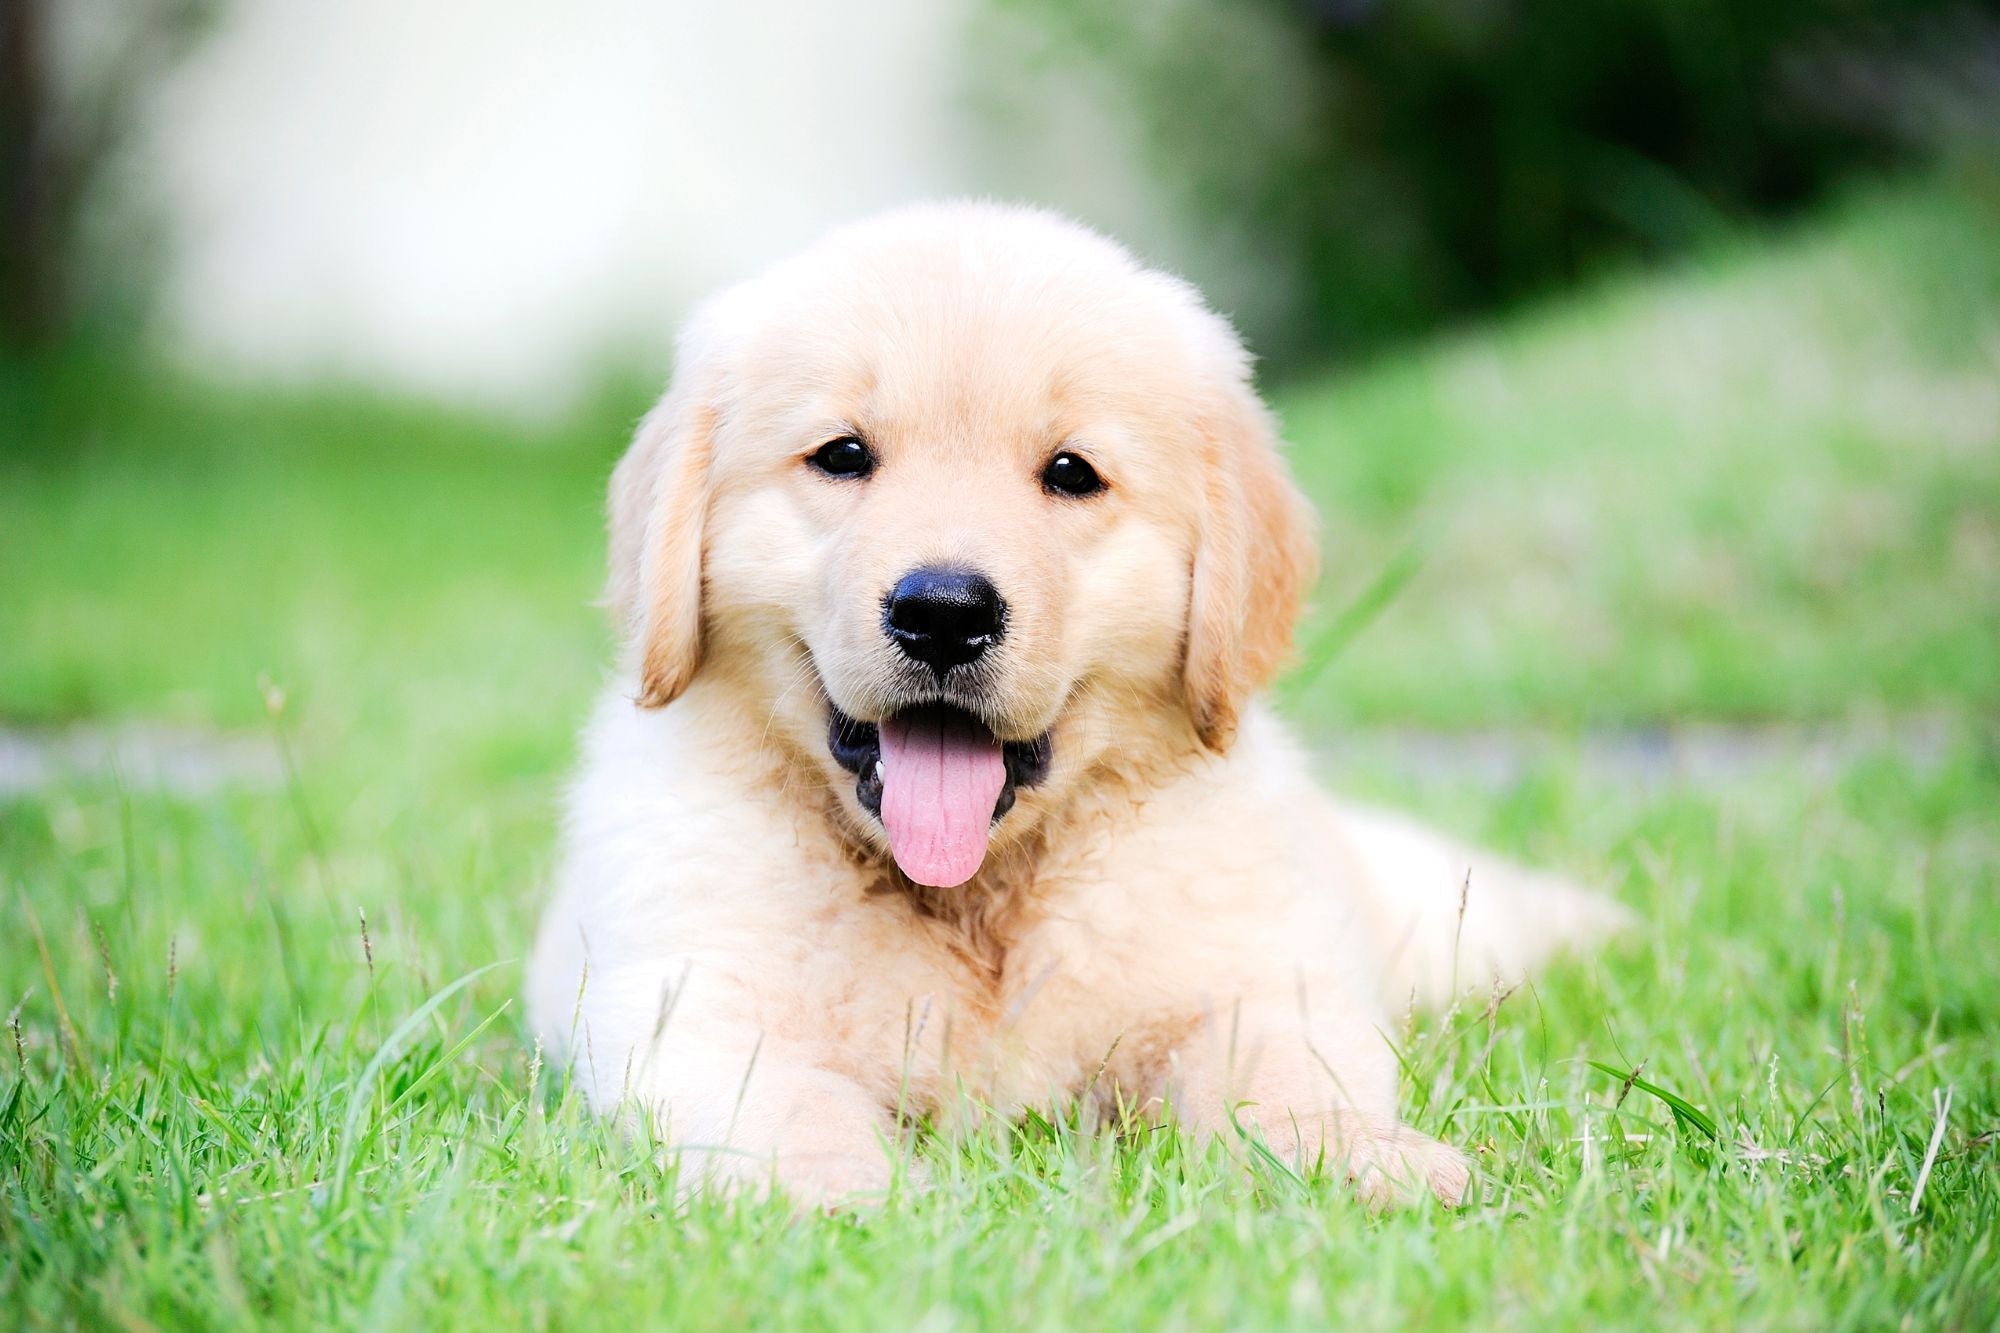 How to Toilet Train Your Puppy in 7 Days: Your Step-by-Step Guide